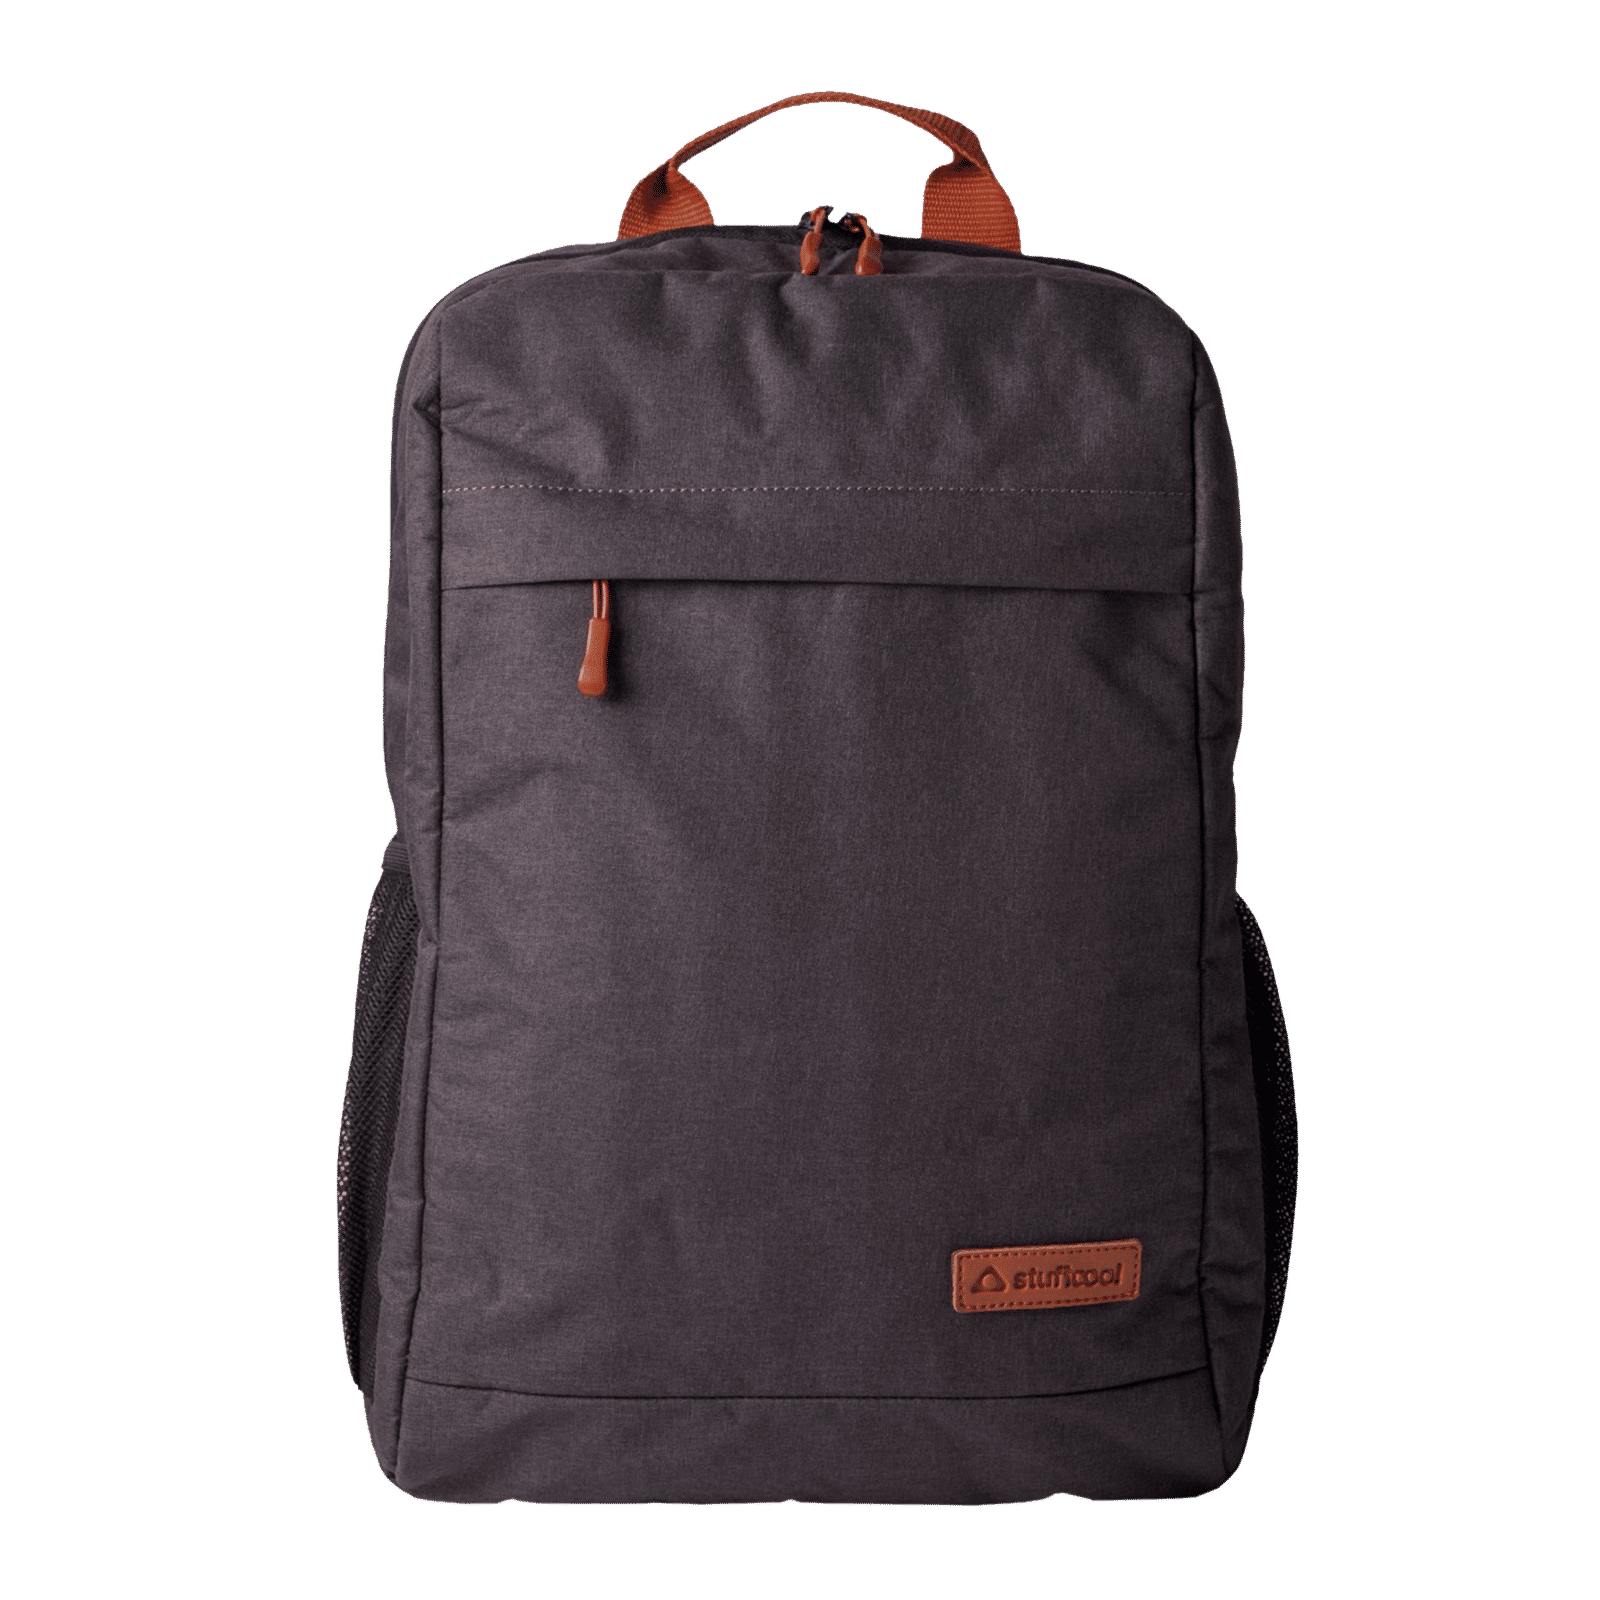 Buy Croma Standard Backpack for 15.6 Inch Laptop with Padded Shoulder  Straps (CRPCB6101SSD01, Blue) at Amazon.in